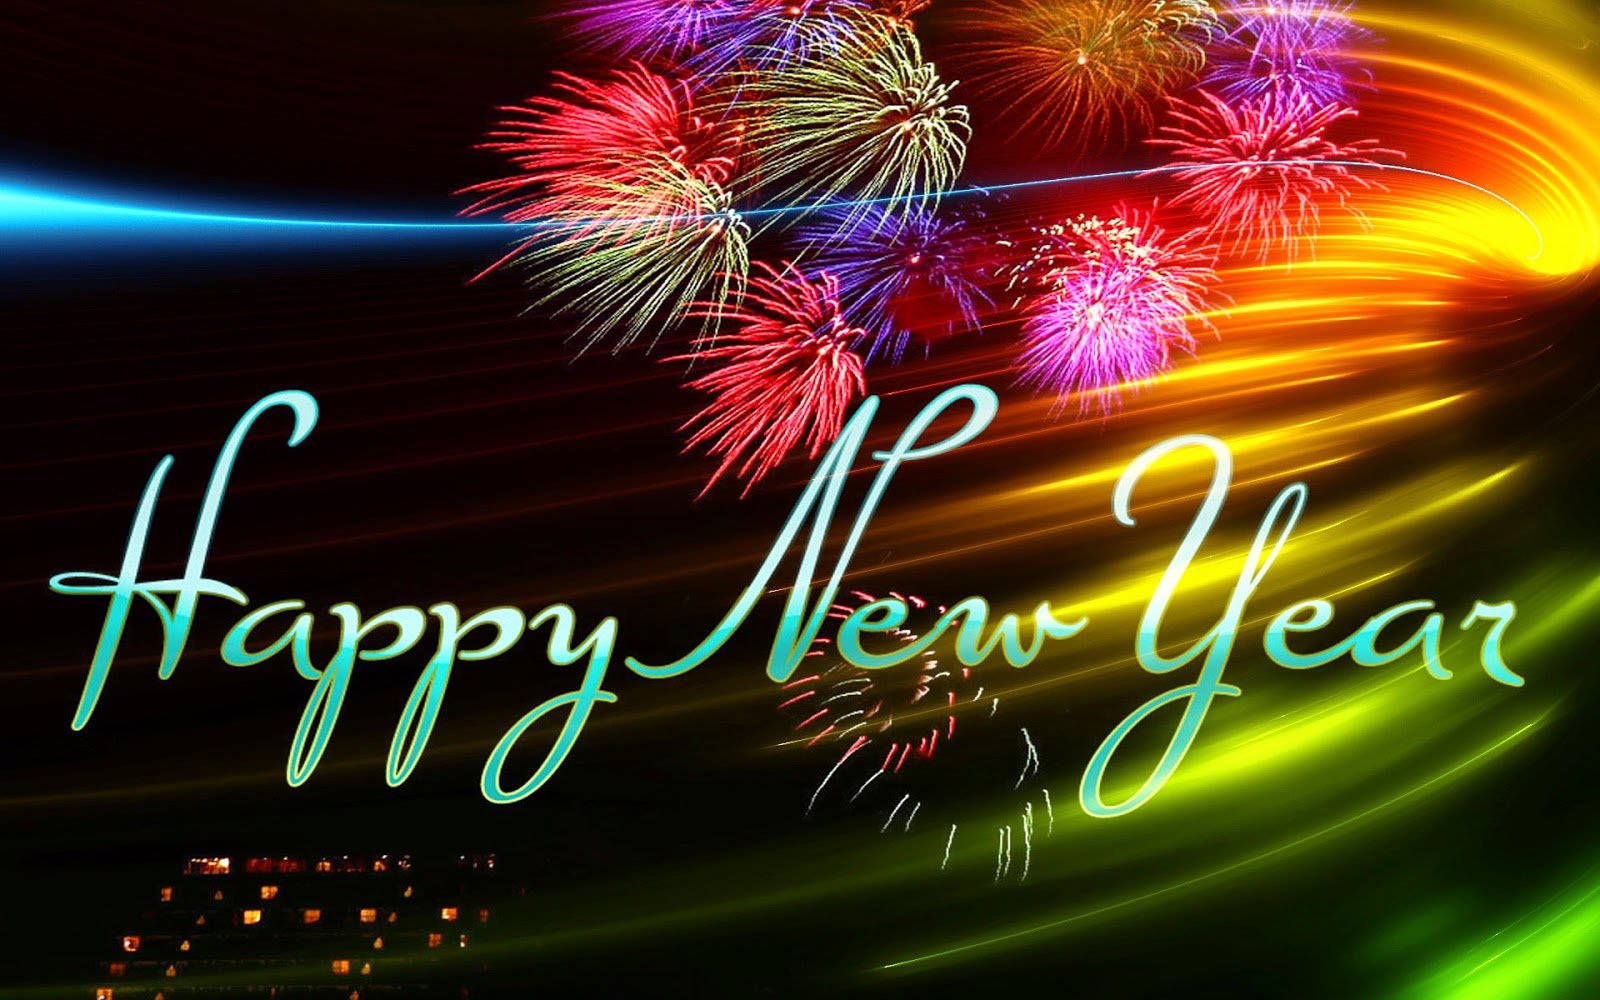  happy new year welcome new year wallpaper wallpaper download